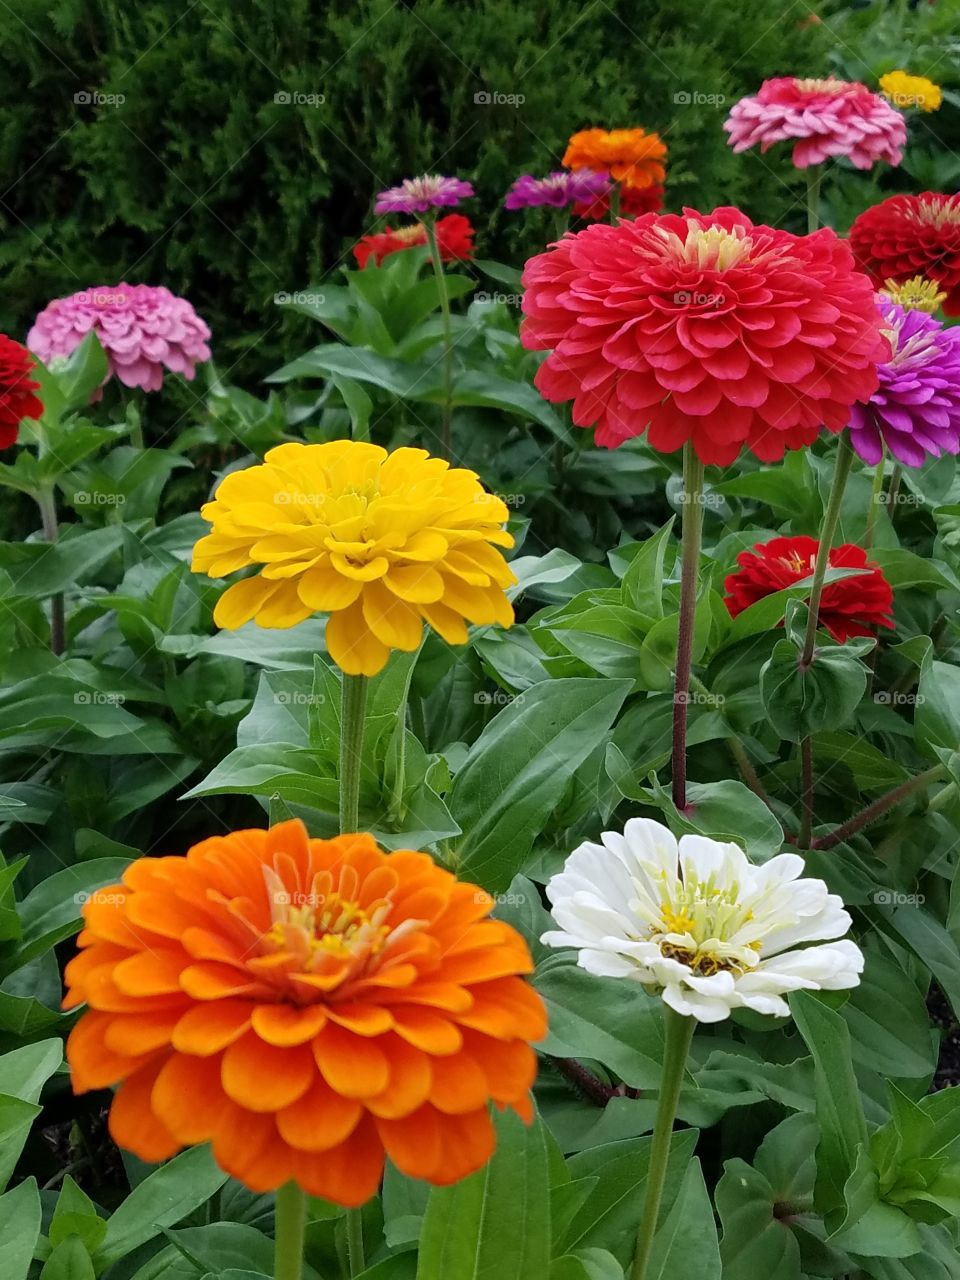 Multicolored flowers in the garden